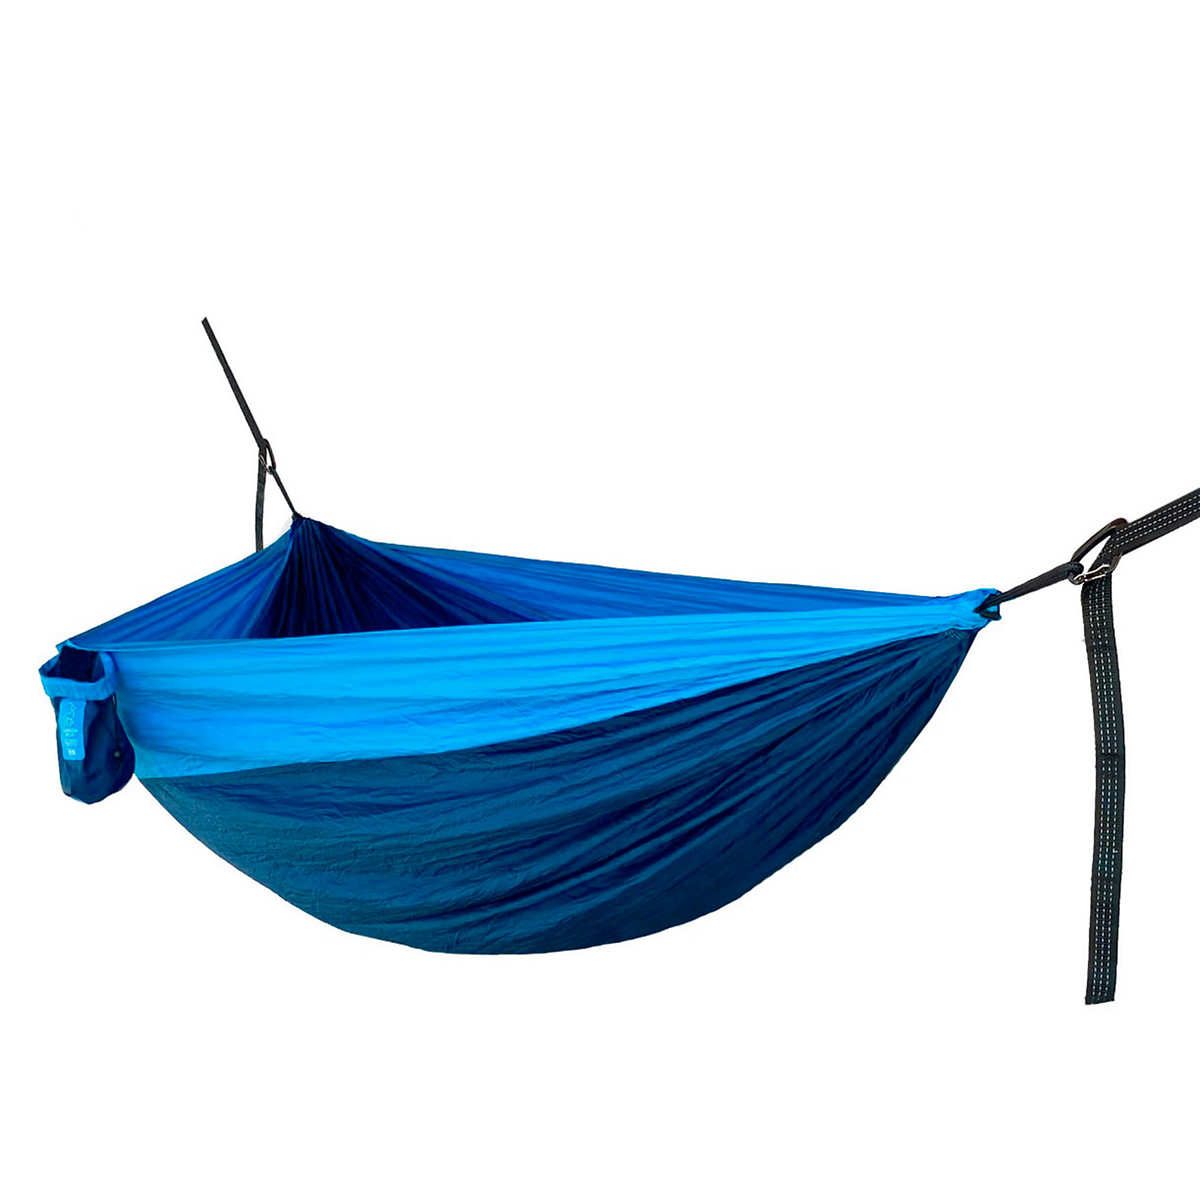 NEW Double Camping Hammock 2 3 Person Outdoor Parachute Tent Travel & Strap 